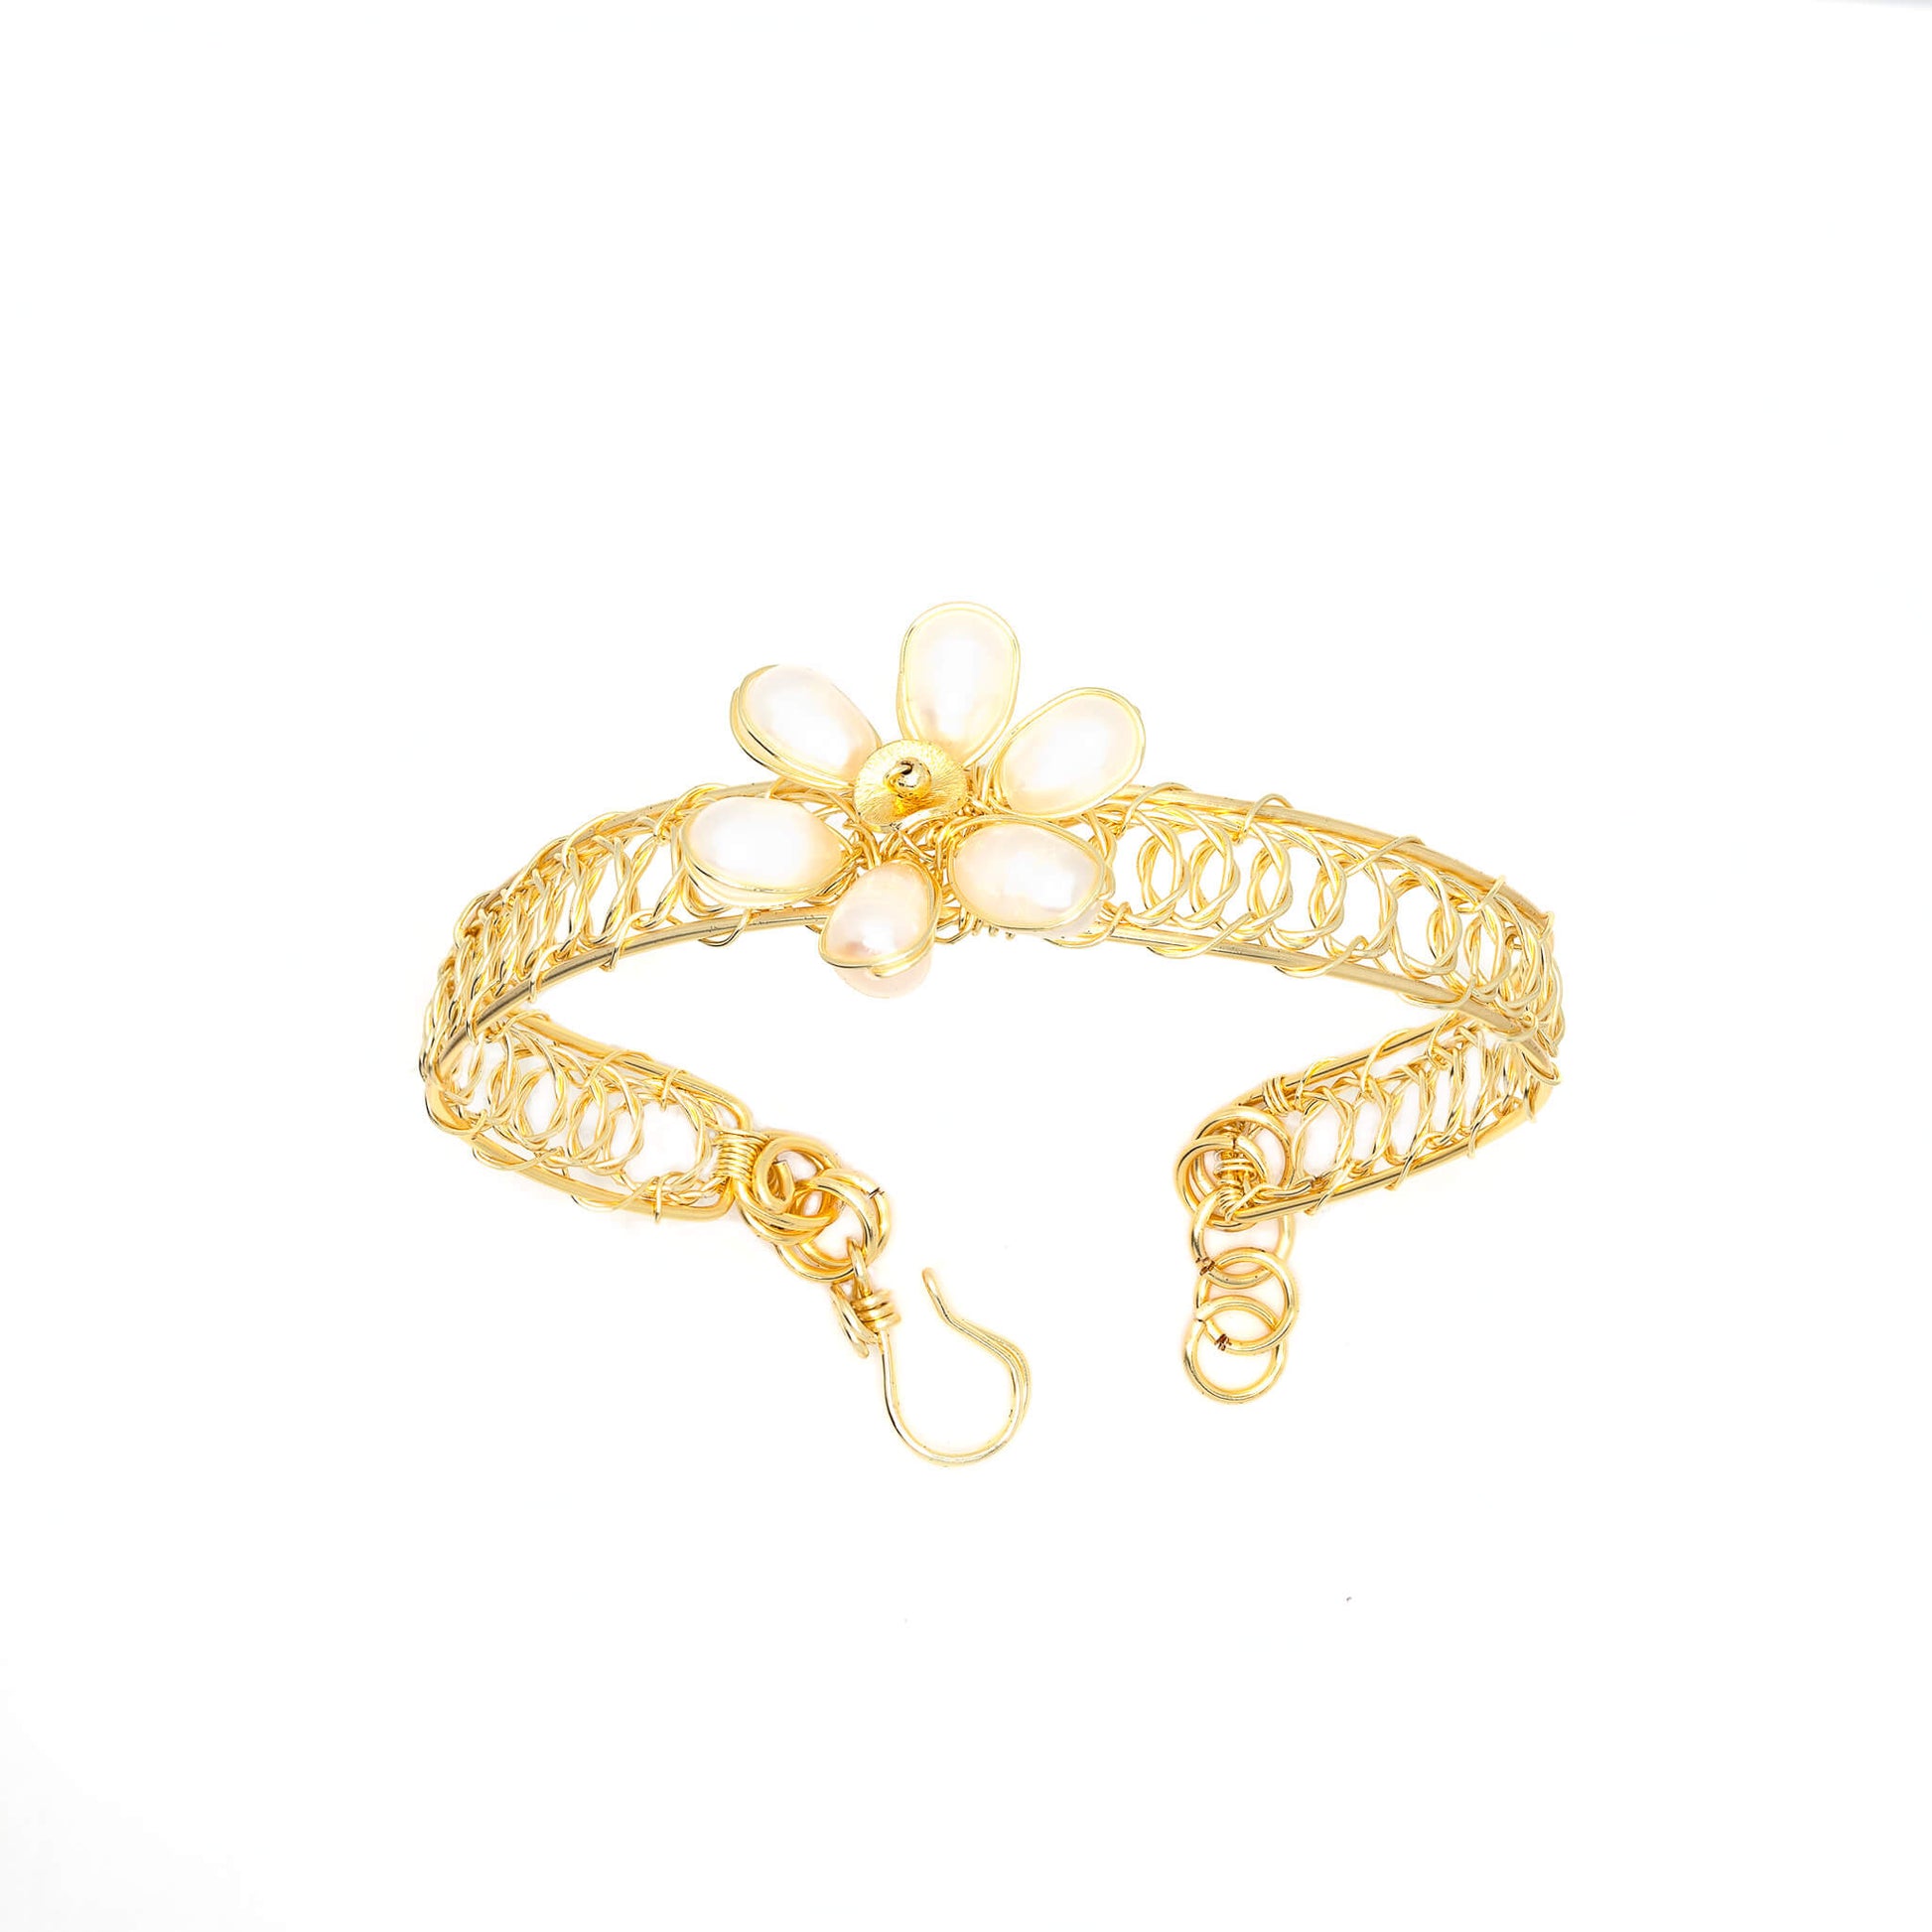 Blaustein Bracelet is one size fits all. Gold and white bracelet. Handmade with Non-tarnish Gold plated wire and Fresh Water Pearls. Wire-wrapped bracelet.